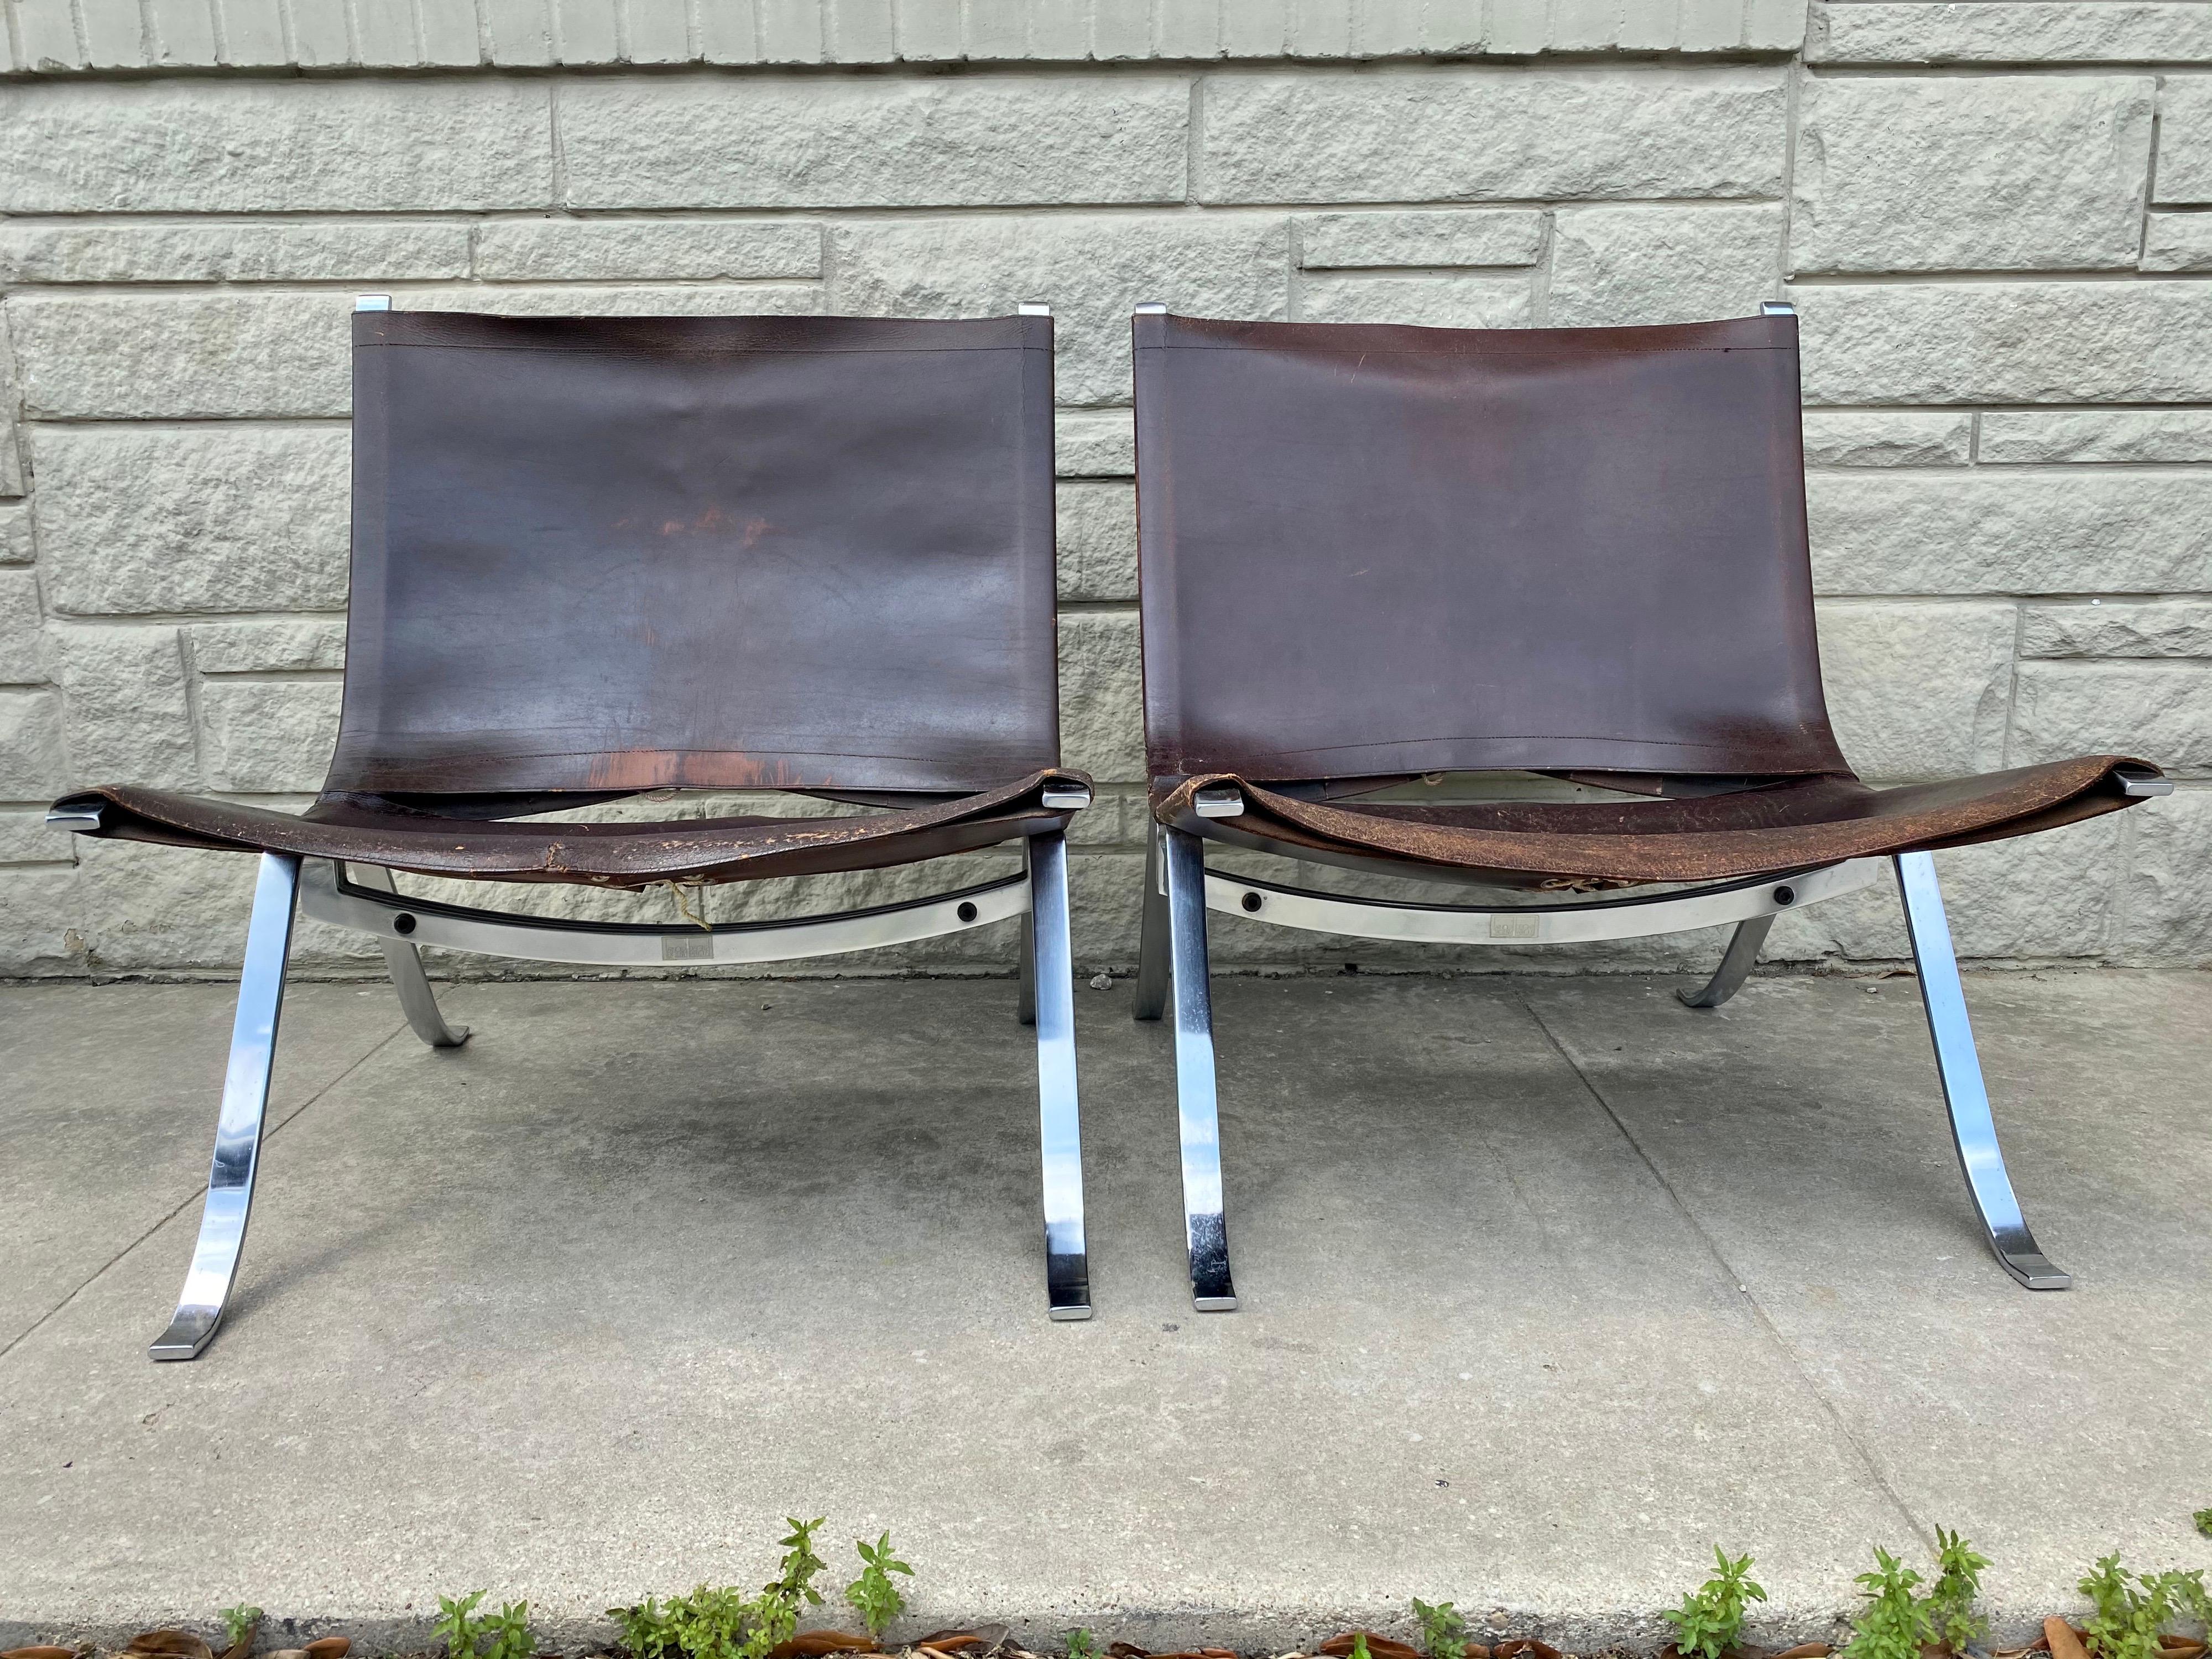 Designed by Preben Fabricius for Arnold Exclusiv, this unique pair is in overall good condition. Original leather. Distressed with scuffs, scratches, and discoloration, please refer to photos for condition. Small leather repair on one chair.